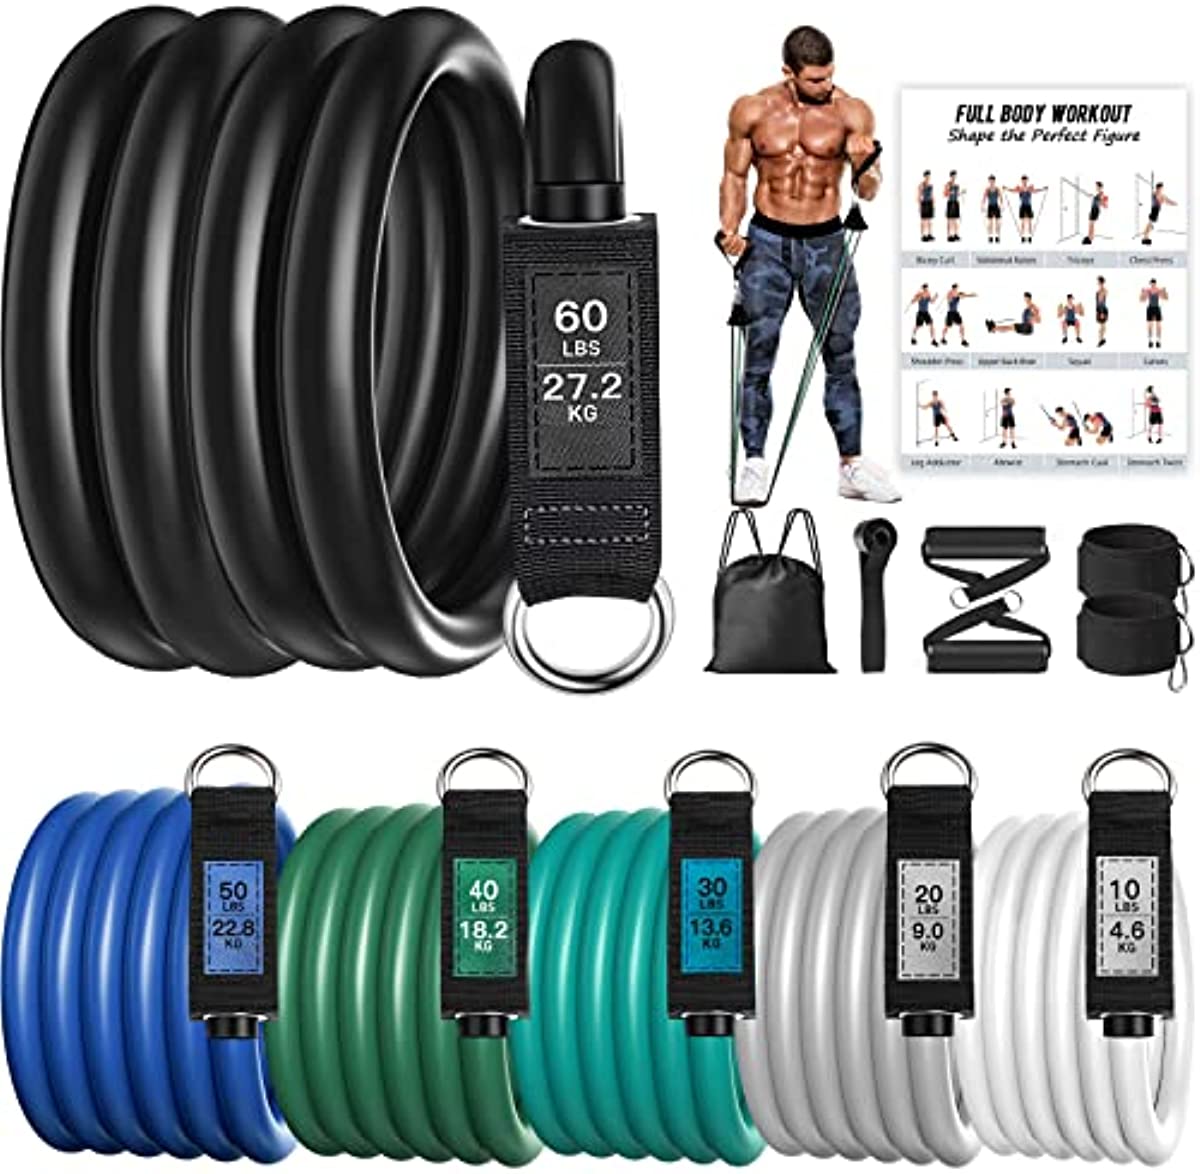 Resistance Bands for Working Out, NITEEN Heavy Resistance Bands with Handles Multi-Weight Men Exercise Bands Set Fitness Workout with Door Anchor and Ankle Straps Strength Training Equipment